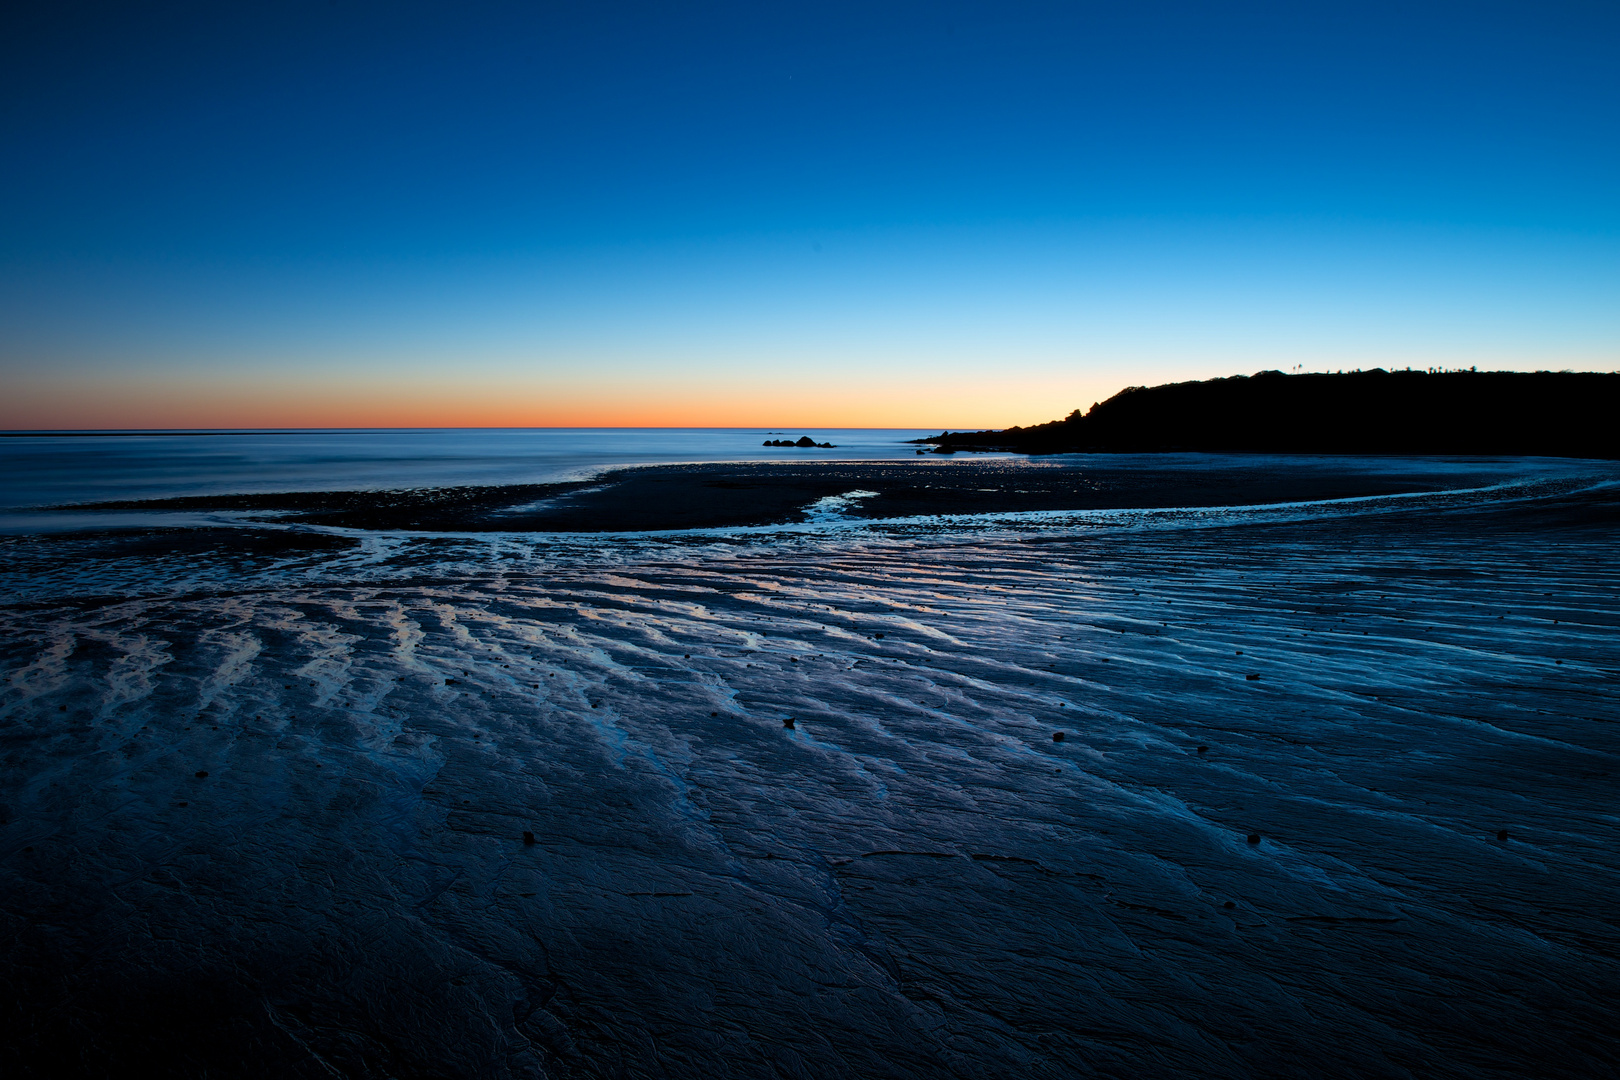 After the Sunset - Cape Leveque